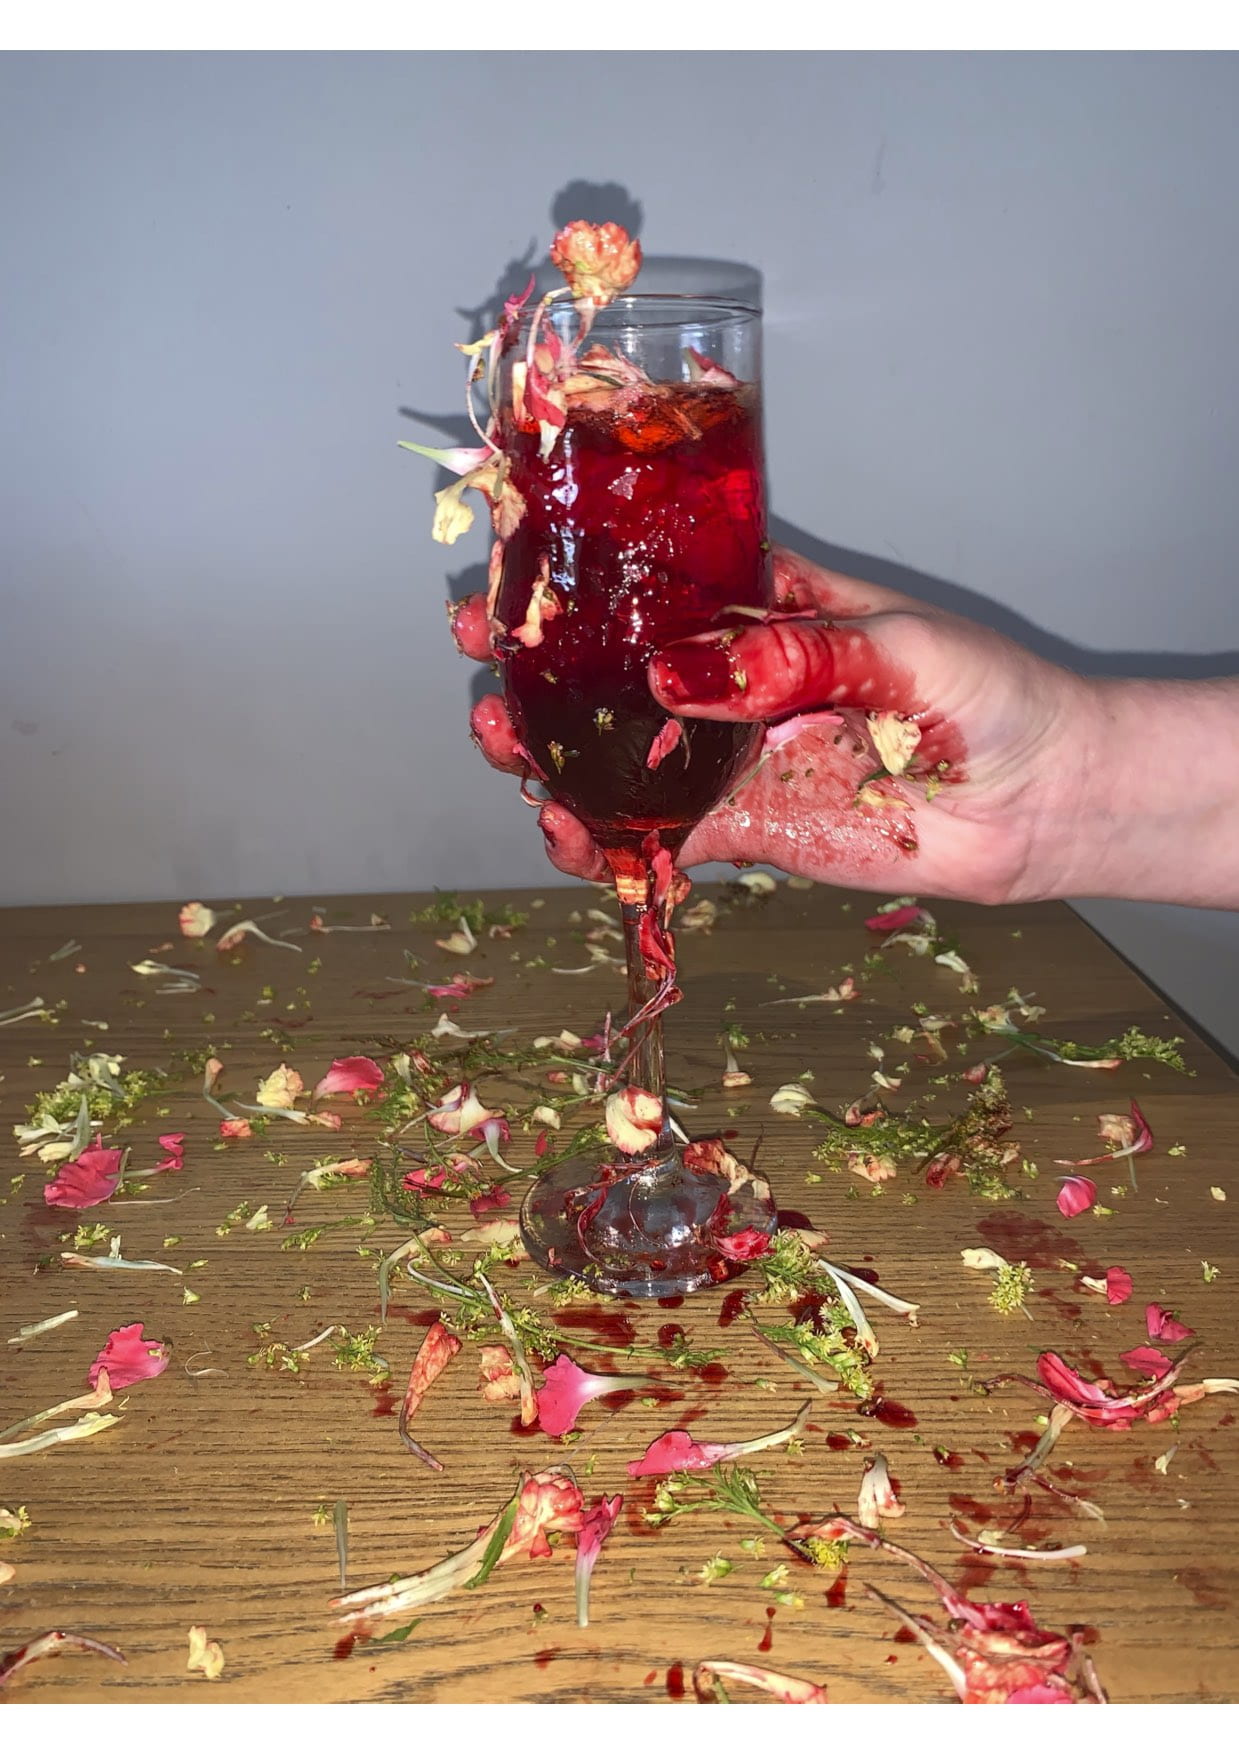 Hand holding a glass full of flowers and red liquid.